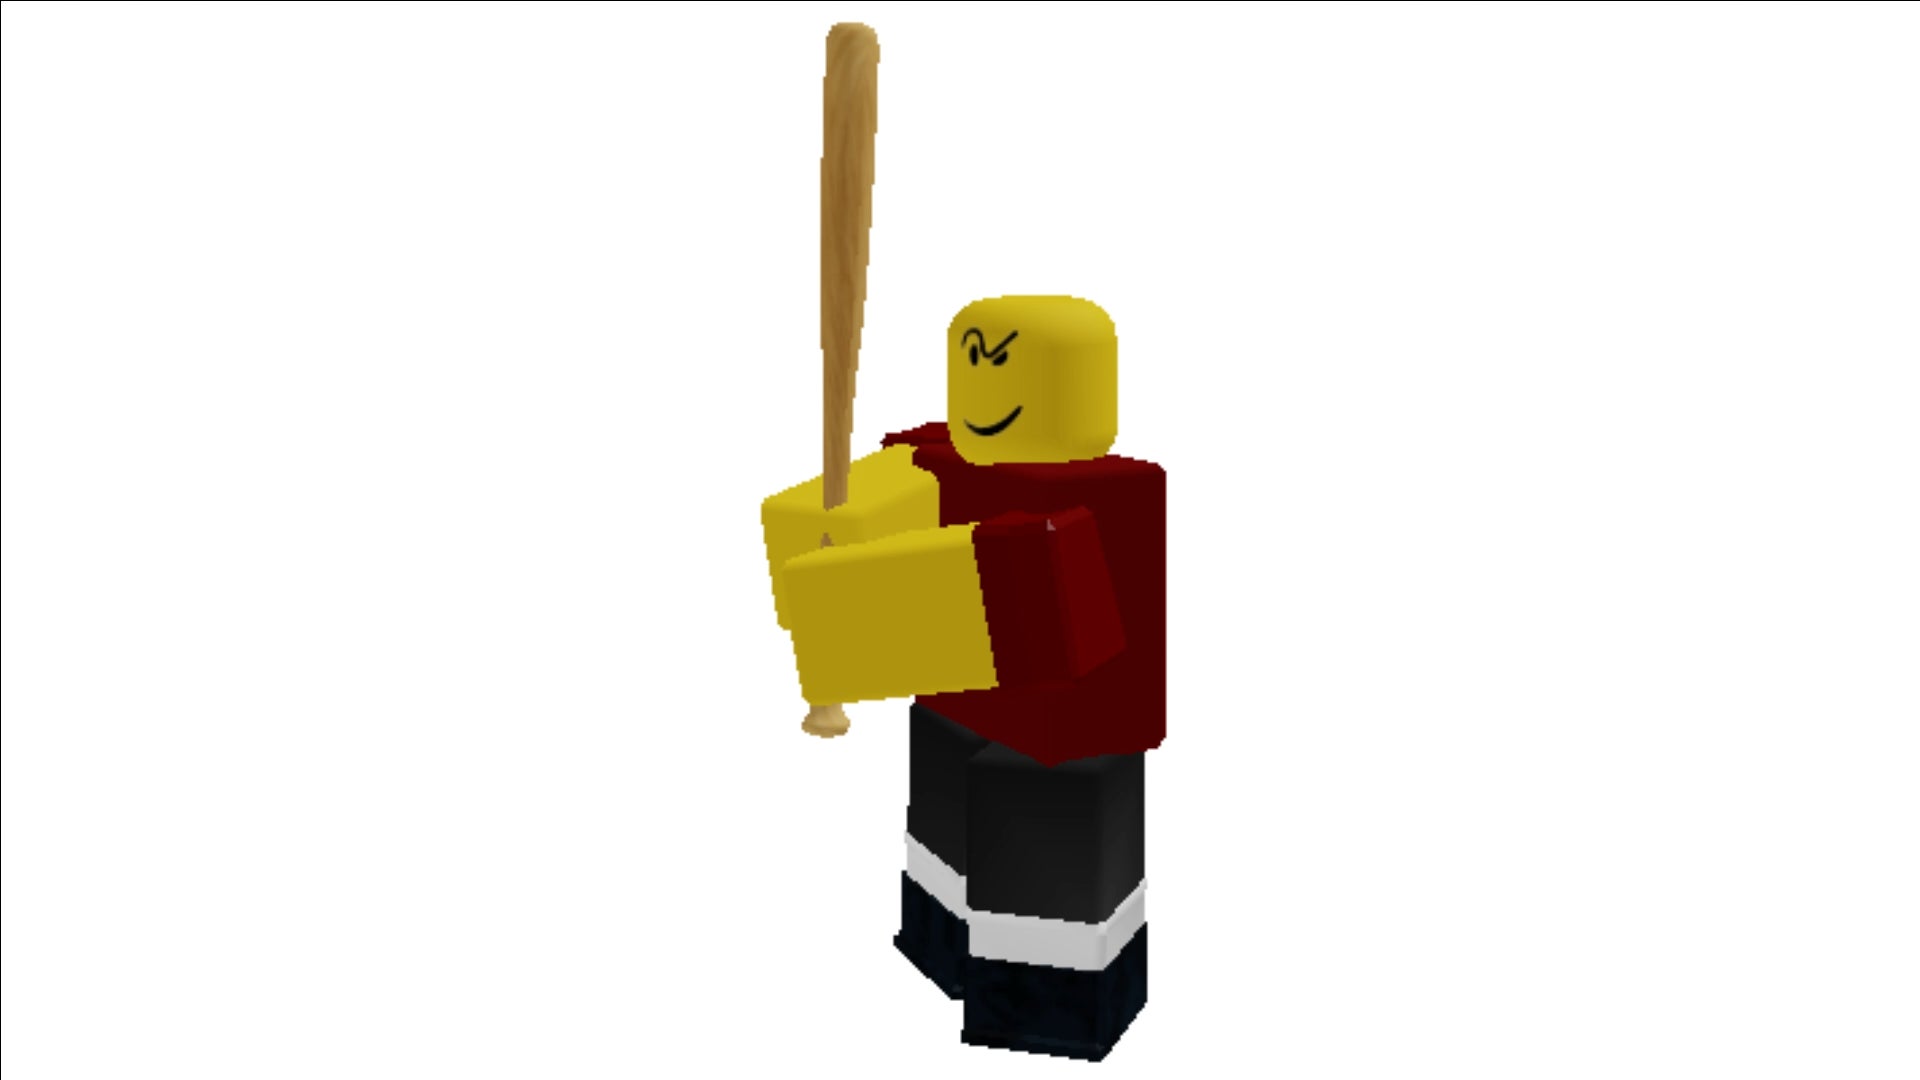 scout is gladiator slugger from roblox game tower defense simulator!